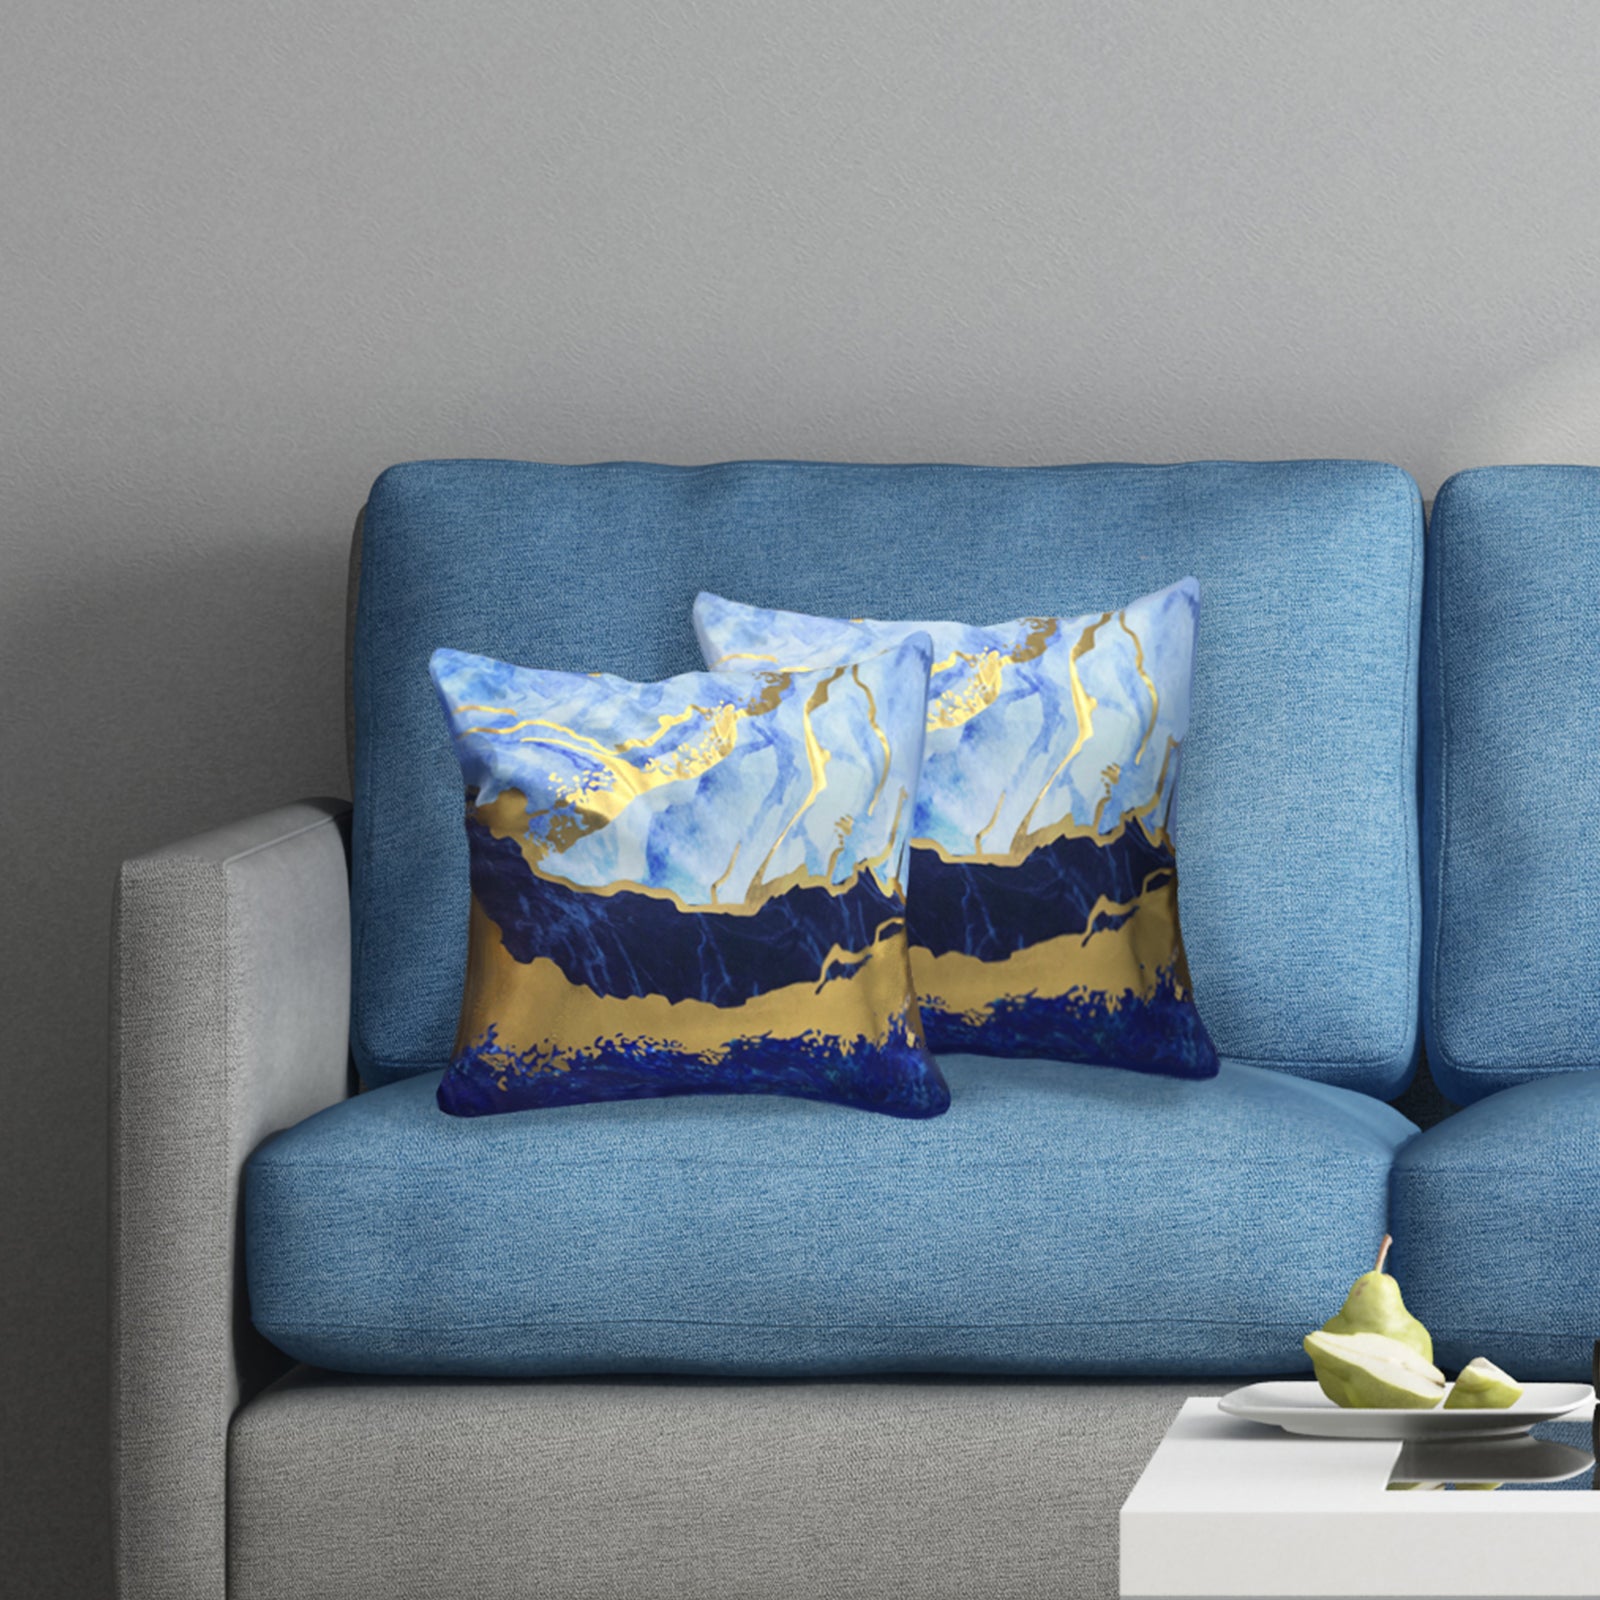 Pack of 4 Decorative Throw Pillow Covers 18x18 Inch Blue Ocean